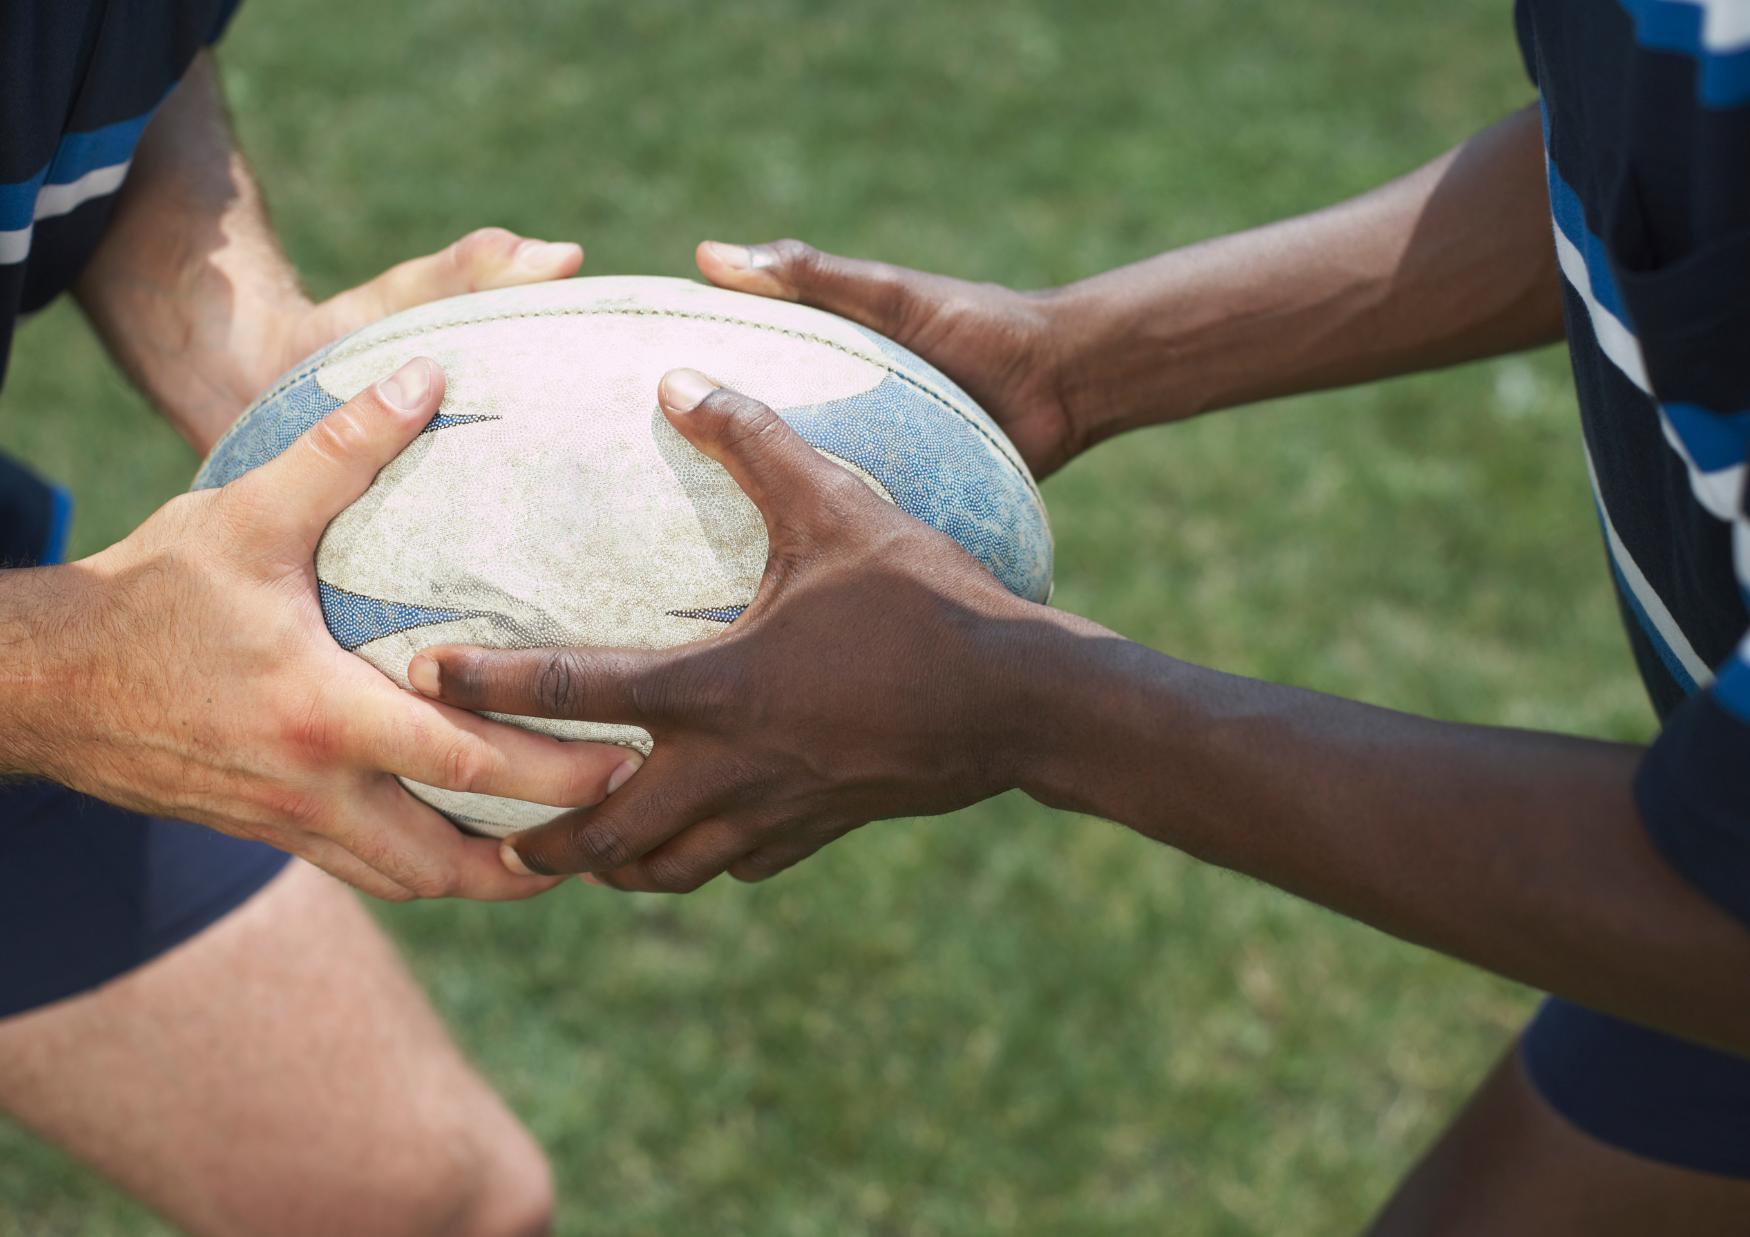 Hands of two boys holding a rugby ball